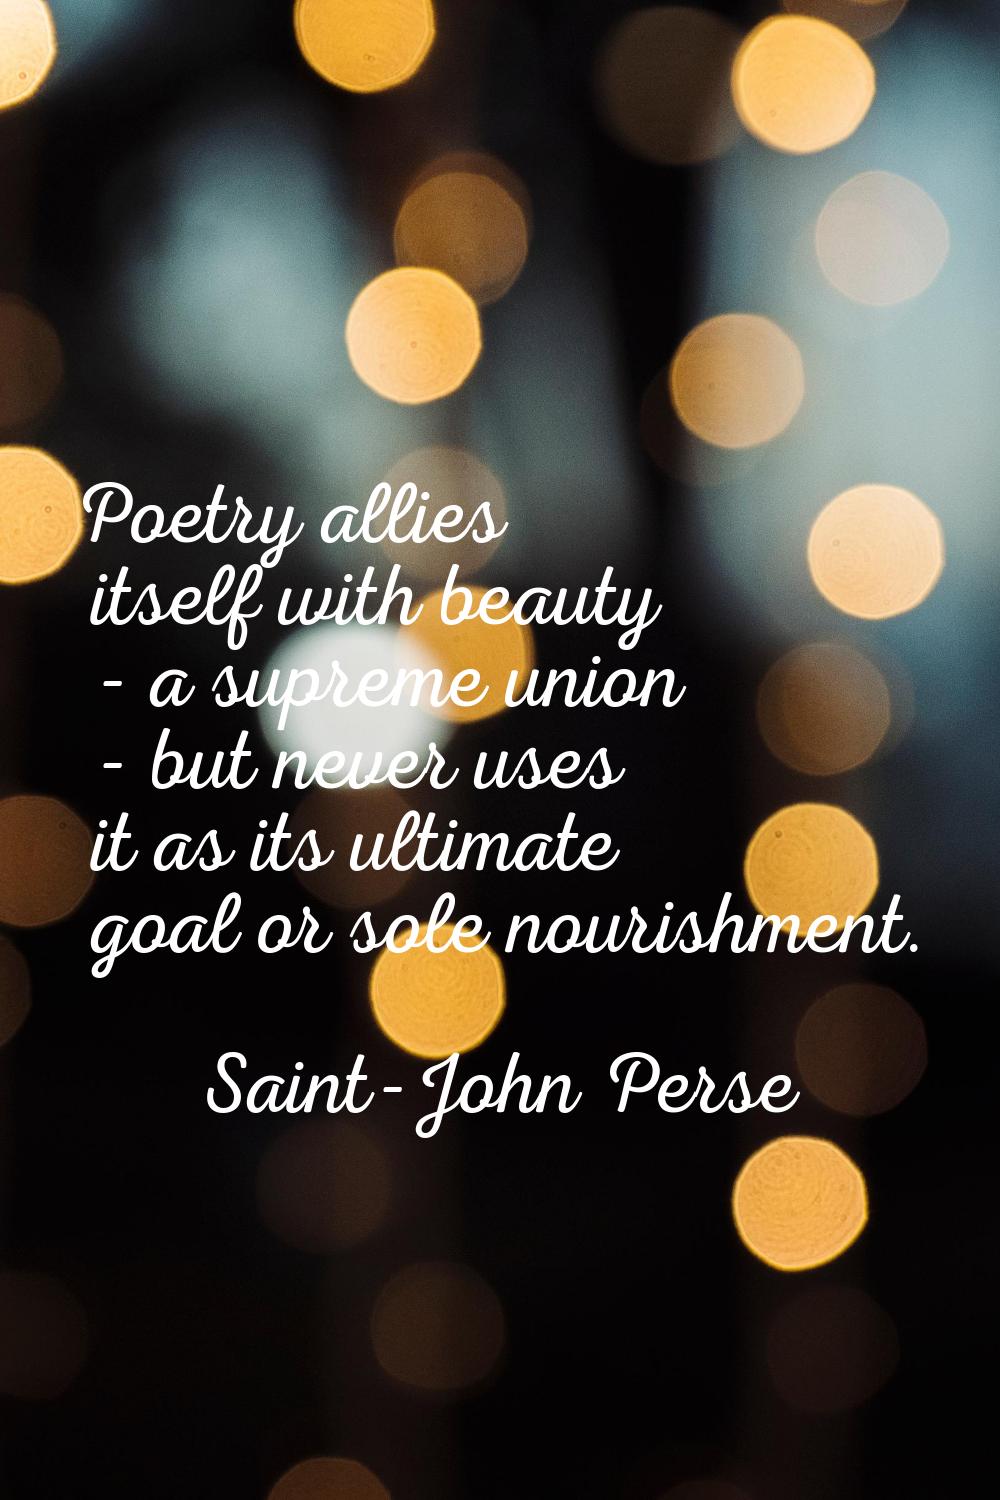 Poetry allies itself with beauty - a supreme union - but never uses it as its ultimate goal or sole